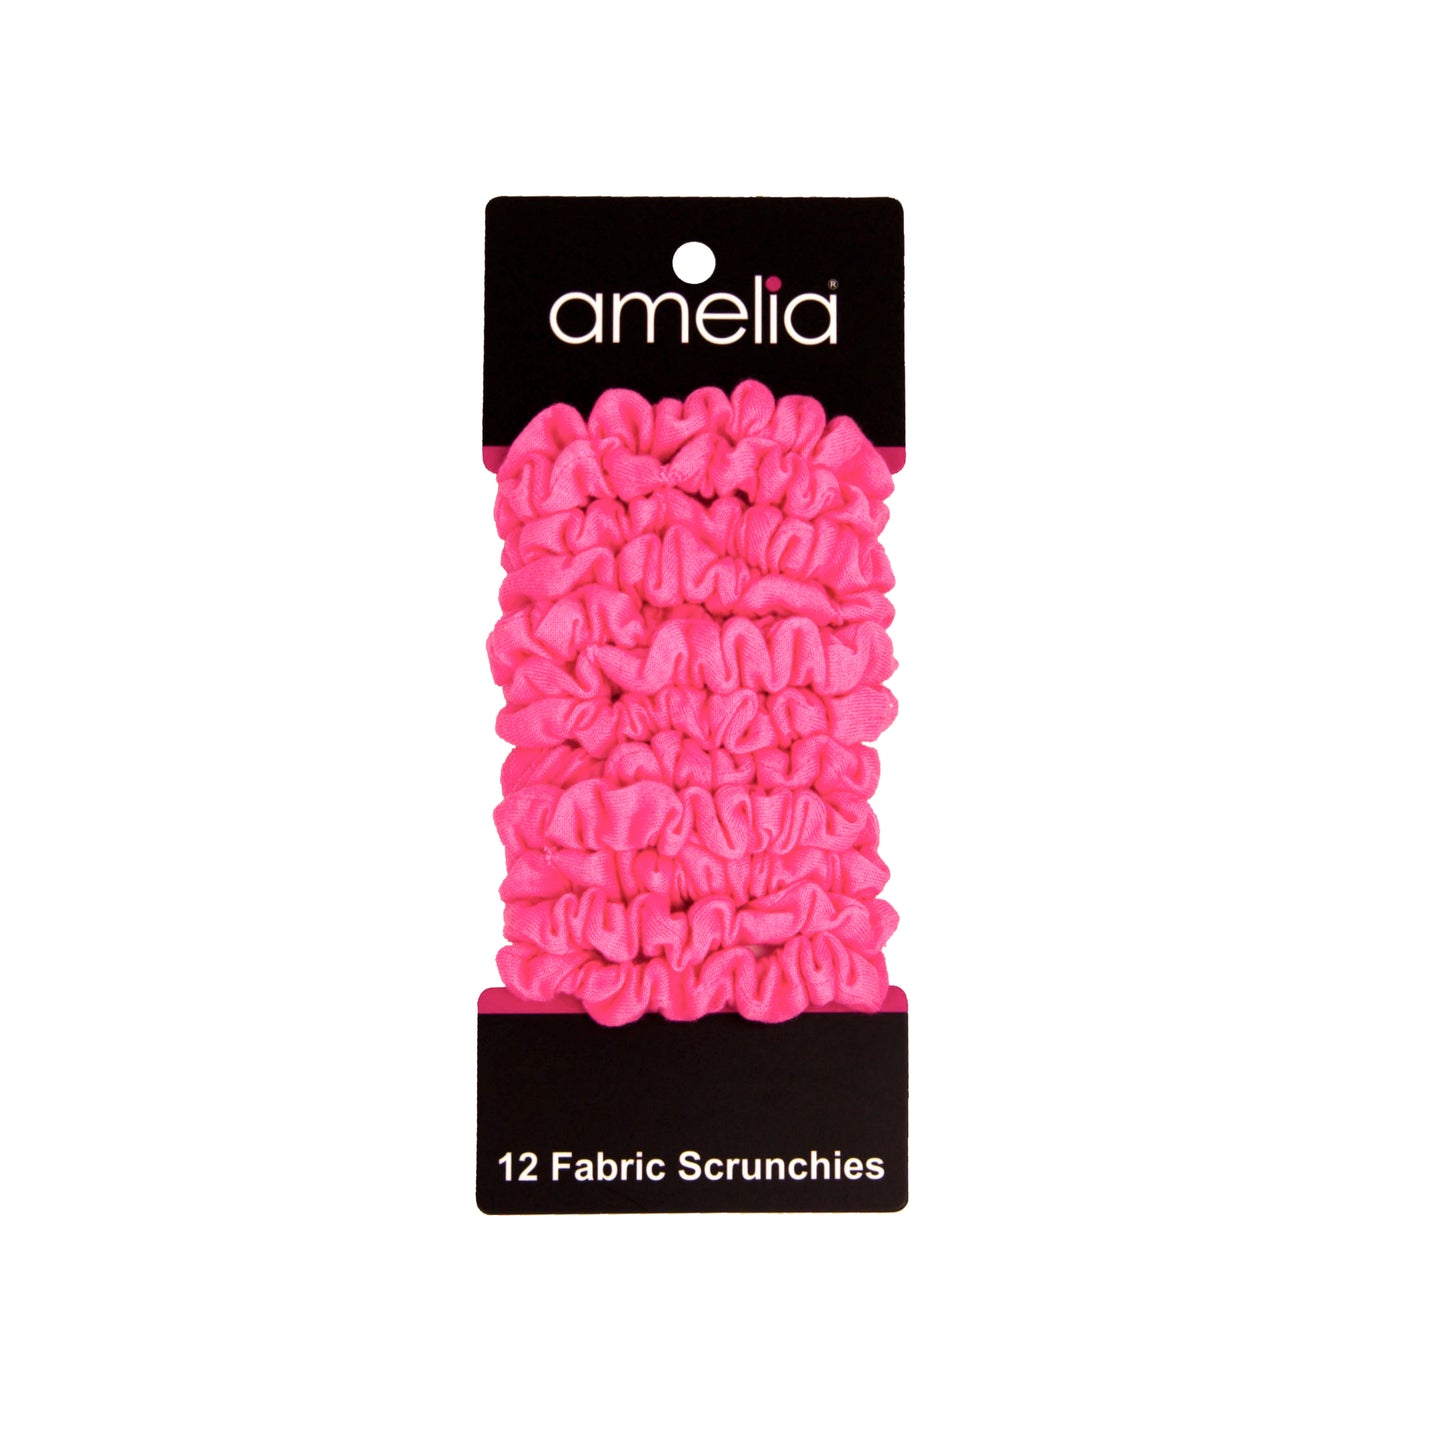 Amelia Beauty, Neon Pink Jersey Scrunchies, 2.25in Diameter, Gentle on Hair, Strong Hold, No Snag, No Dents or Creases. 12 Pack